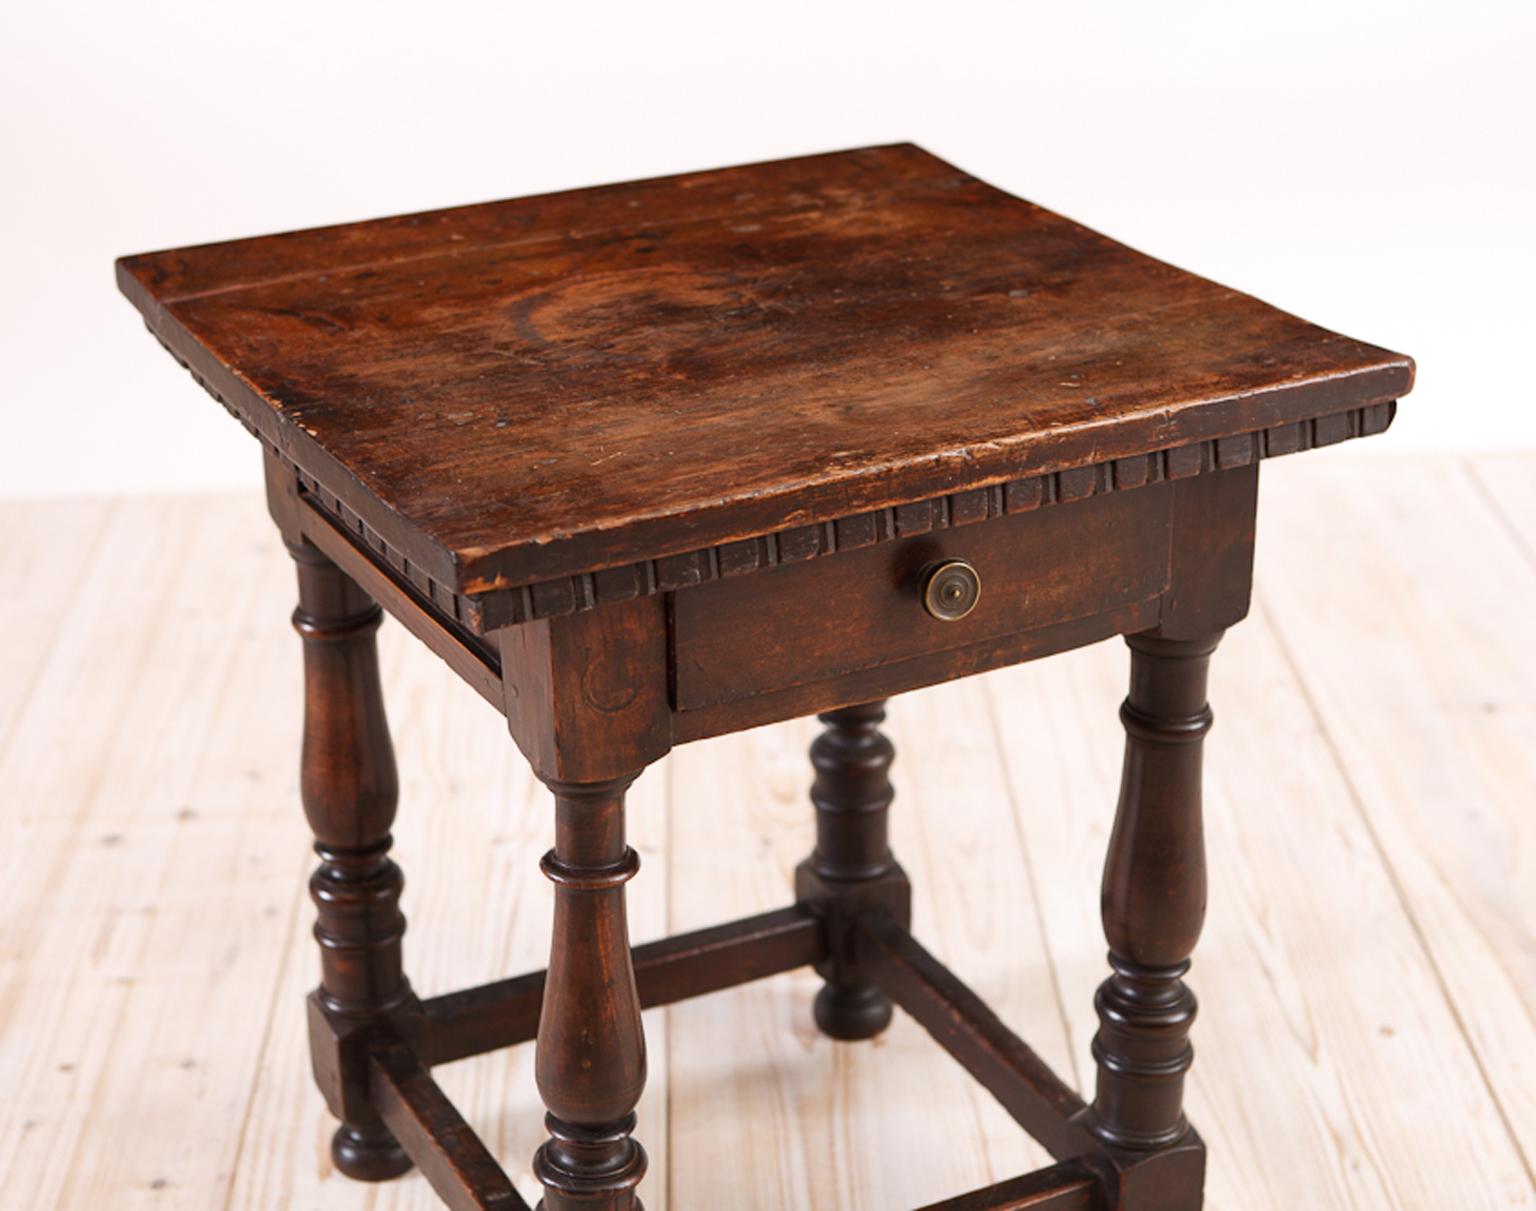 A small rustic hardwood table with vase-ring-and-cup turned legs on box stretcher with bun feet that are part of the leg turning.  All elements of the table appear to be original 19th century and possibly Italian in origin. Offers one